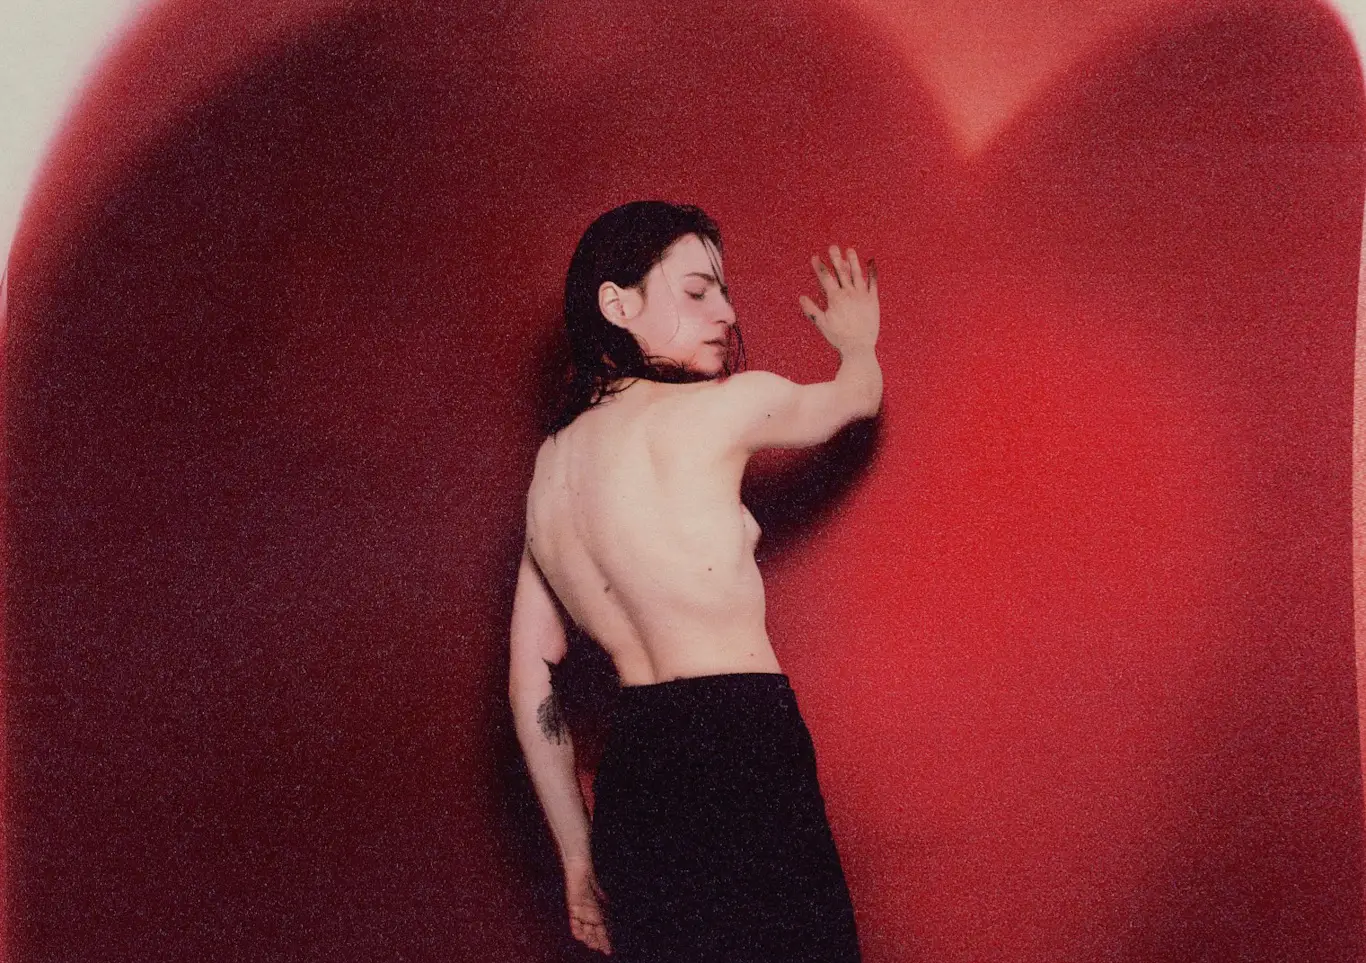 CHRISTINE AND THE QUEENS releases new single ‘True Love’ (ft. 070 Shake)